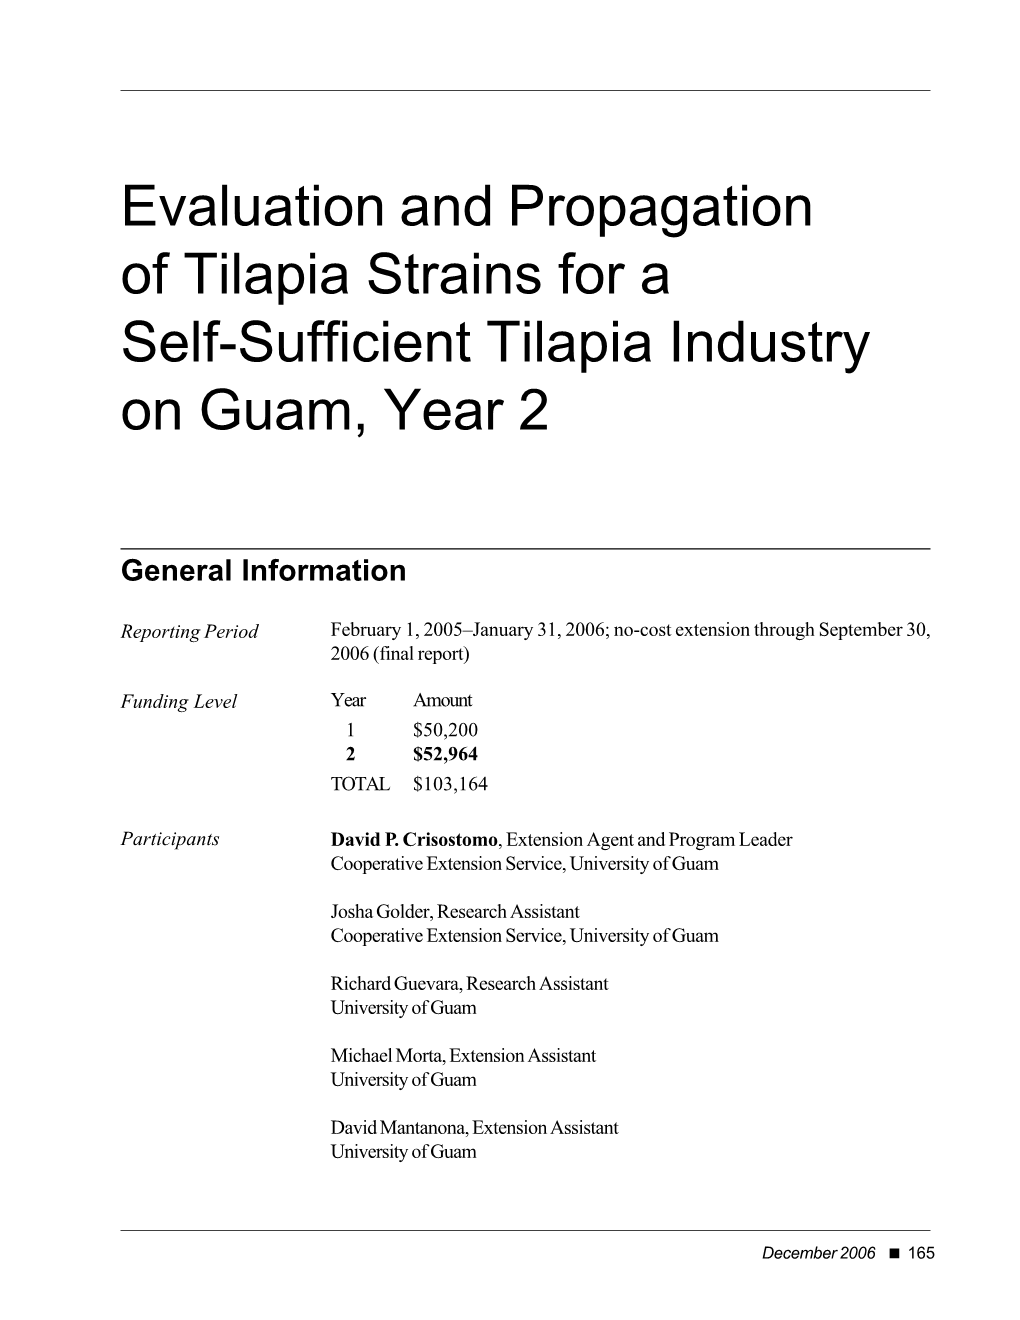 Evaluation and Propagation of Tilapia Strains for a Self-Sufficient Tilapia Industry on Guam, Year 2